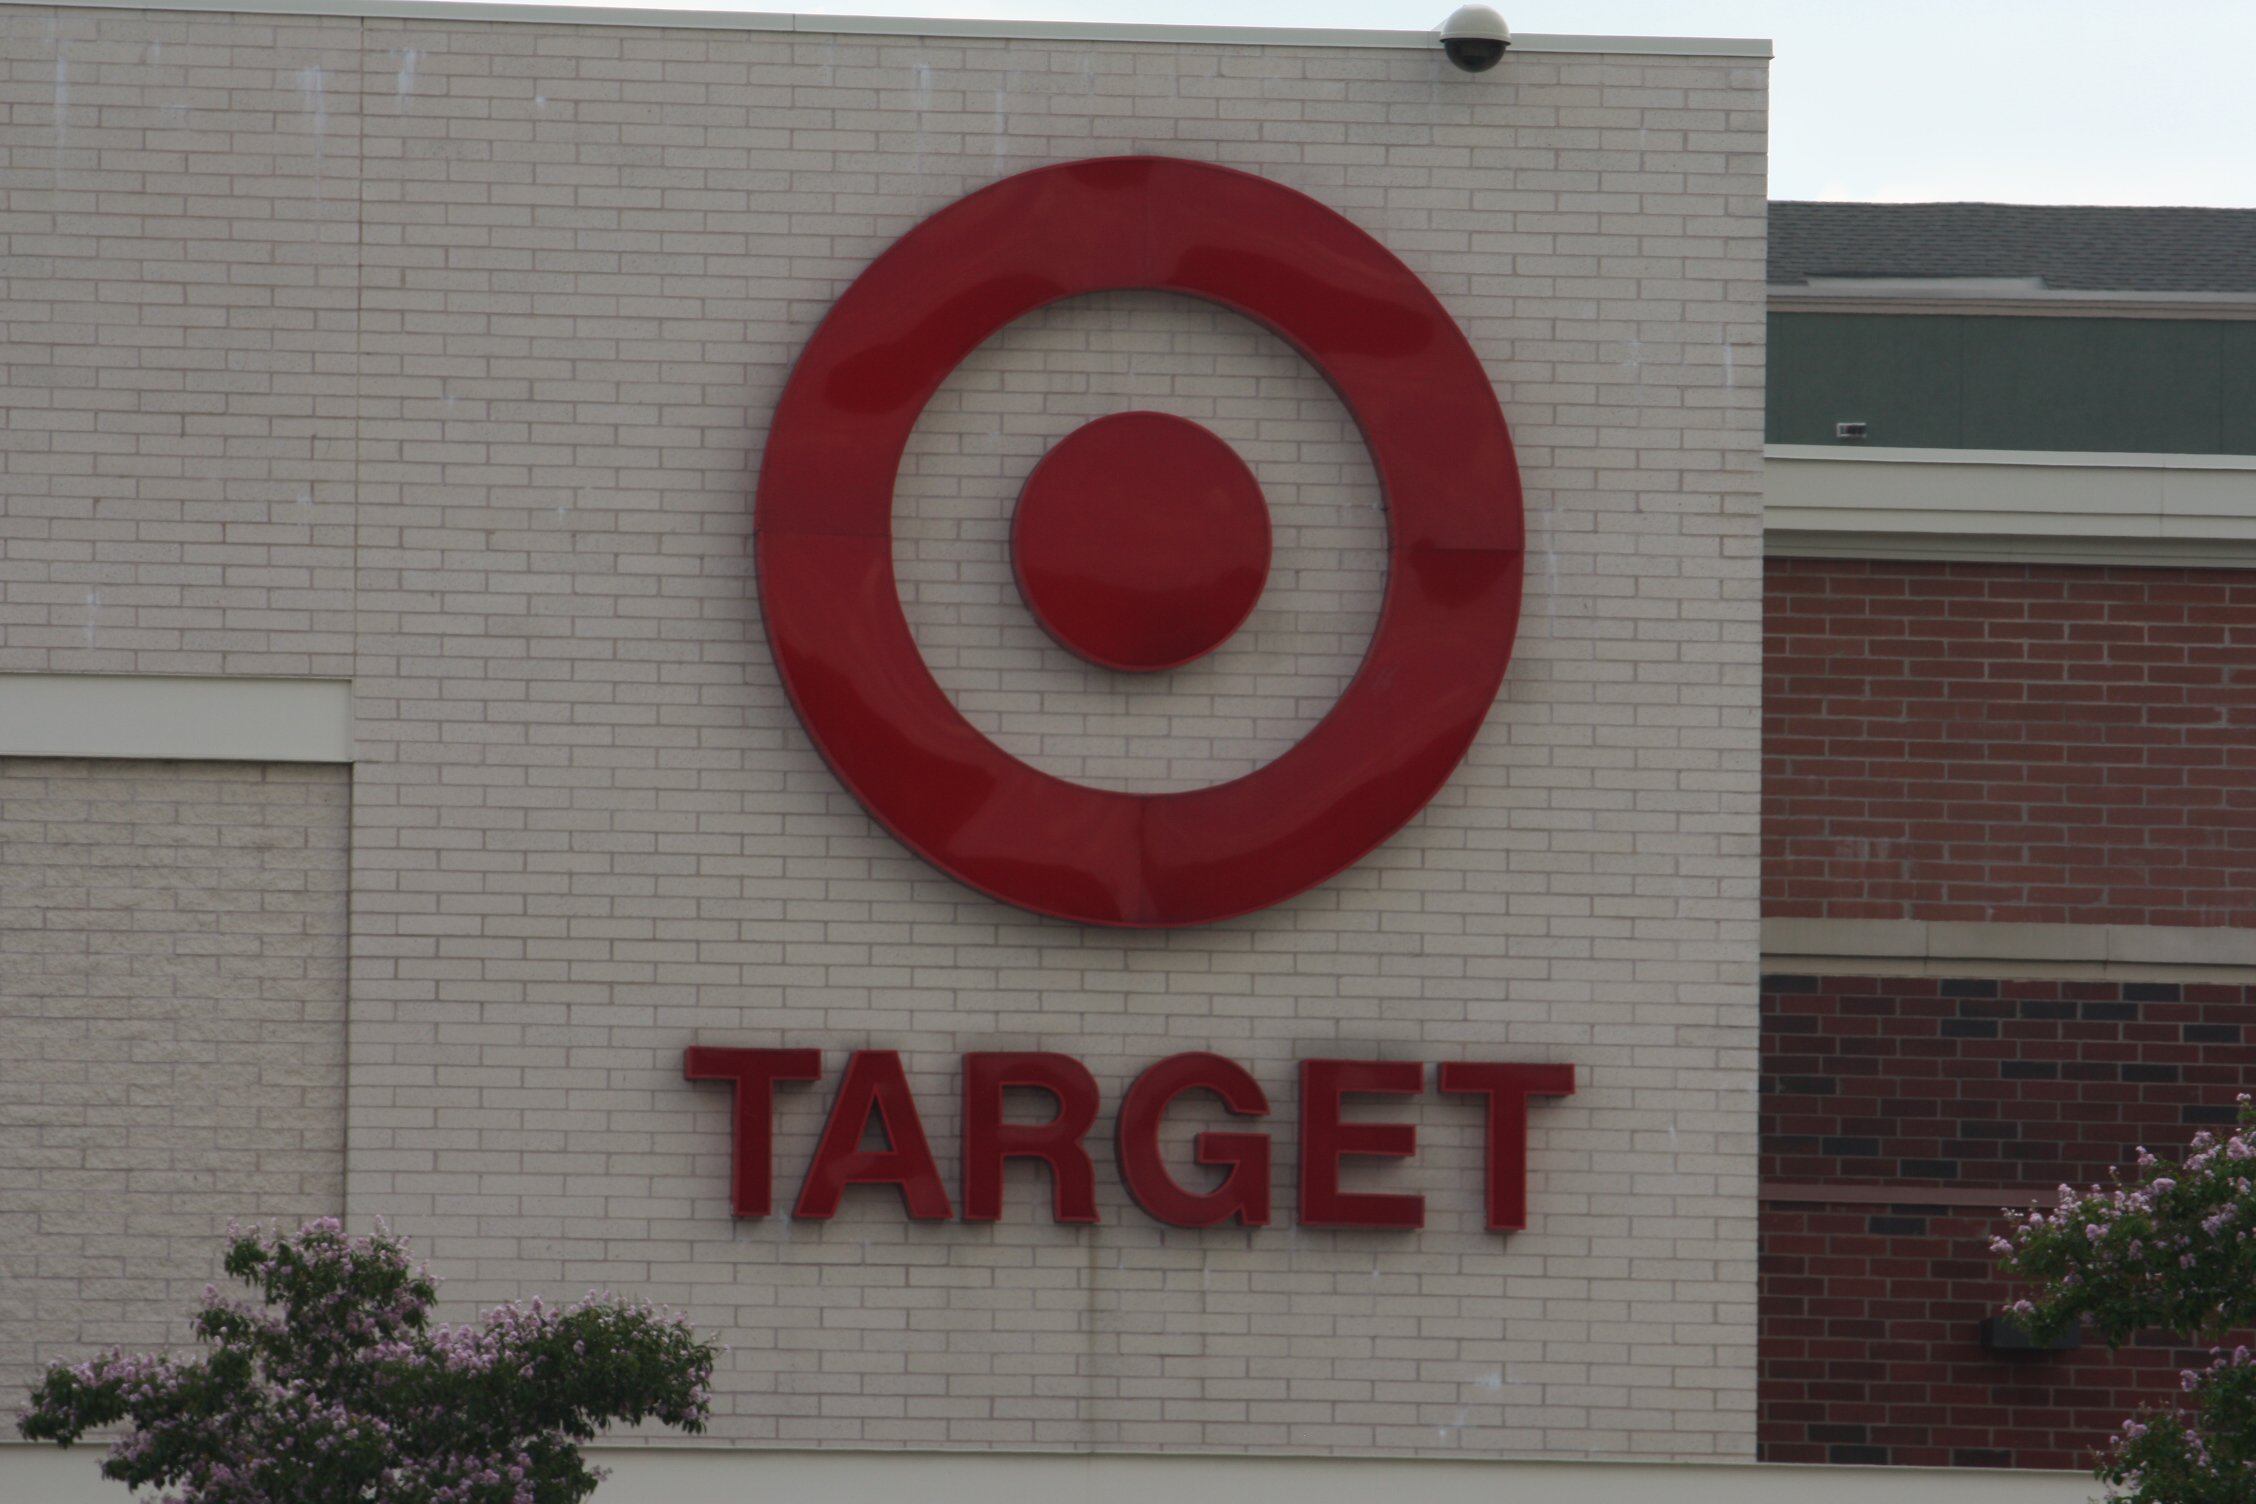 (FILE PHOTO) An unidentified Target store is shown in this file photograph.